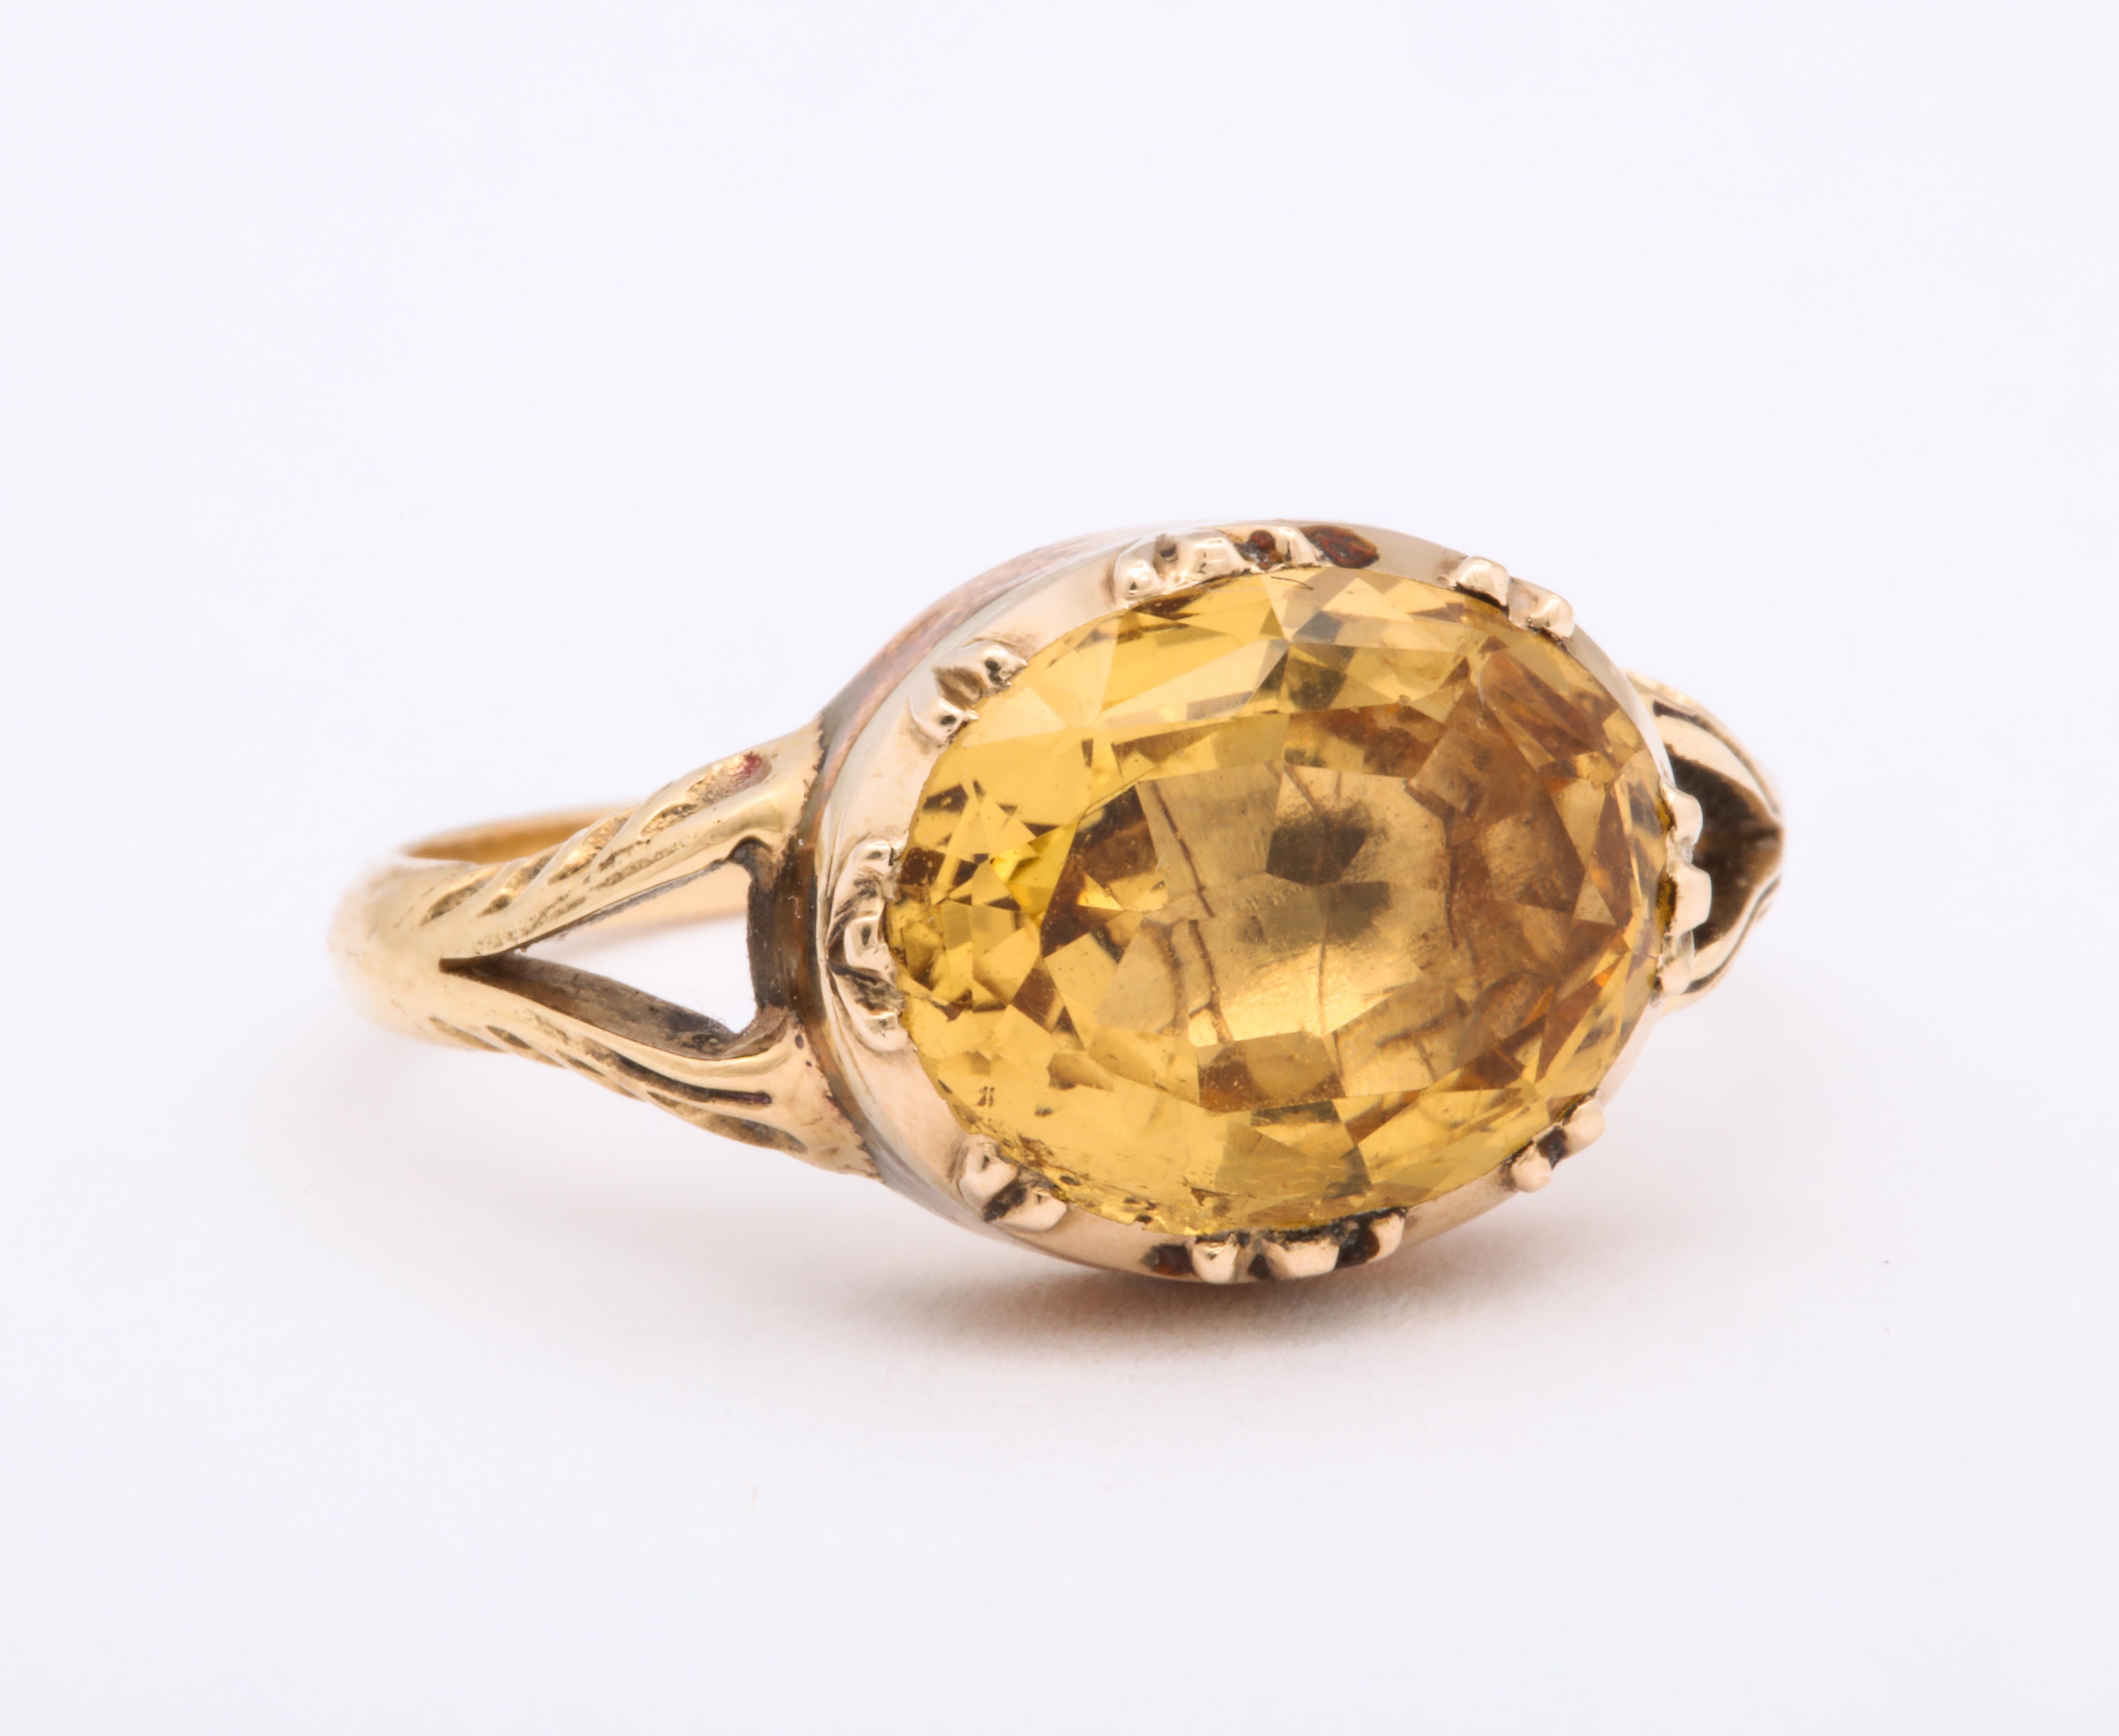 Firmly set In 15 Kt gold triple claw prongs, the oval 4 Ct topaz rests warmly glowing the color of clover honey. Georgian, and in fine condition, this ring has a shank that is doubled at the shoulders as it attaches to a deeper gold foiled closed